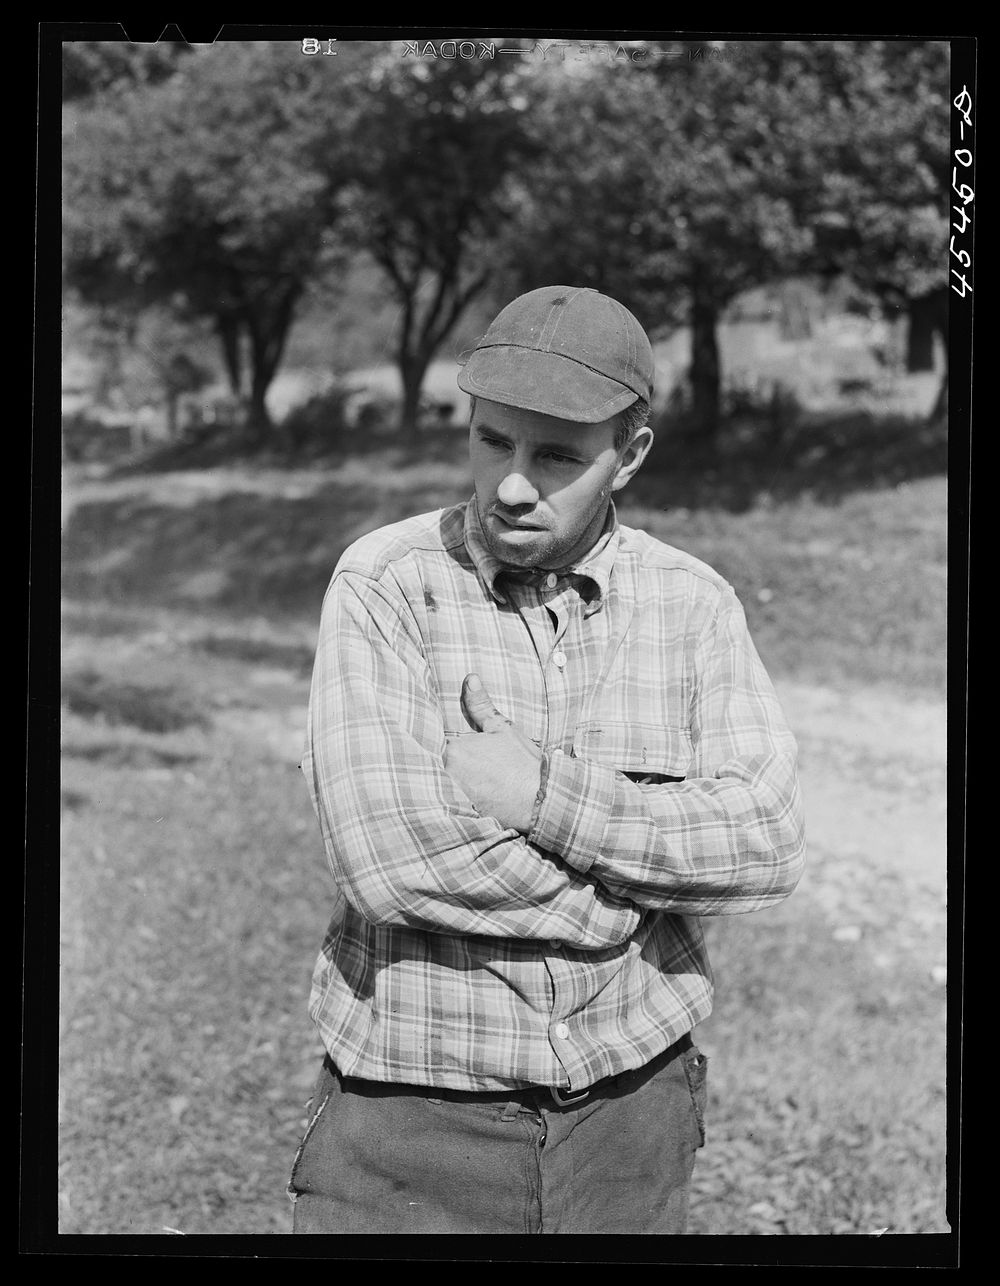 Mr. Horatio Weaver, FSA (Farm Security Administration) farmer in Tinmouth, Vermont. Sourced from the Library of Congress.